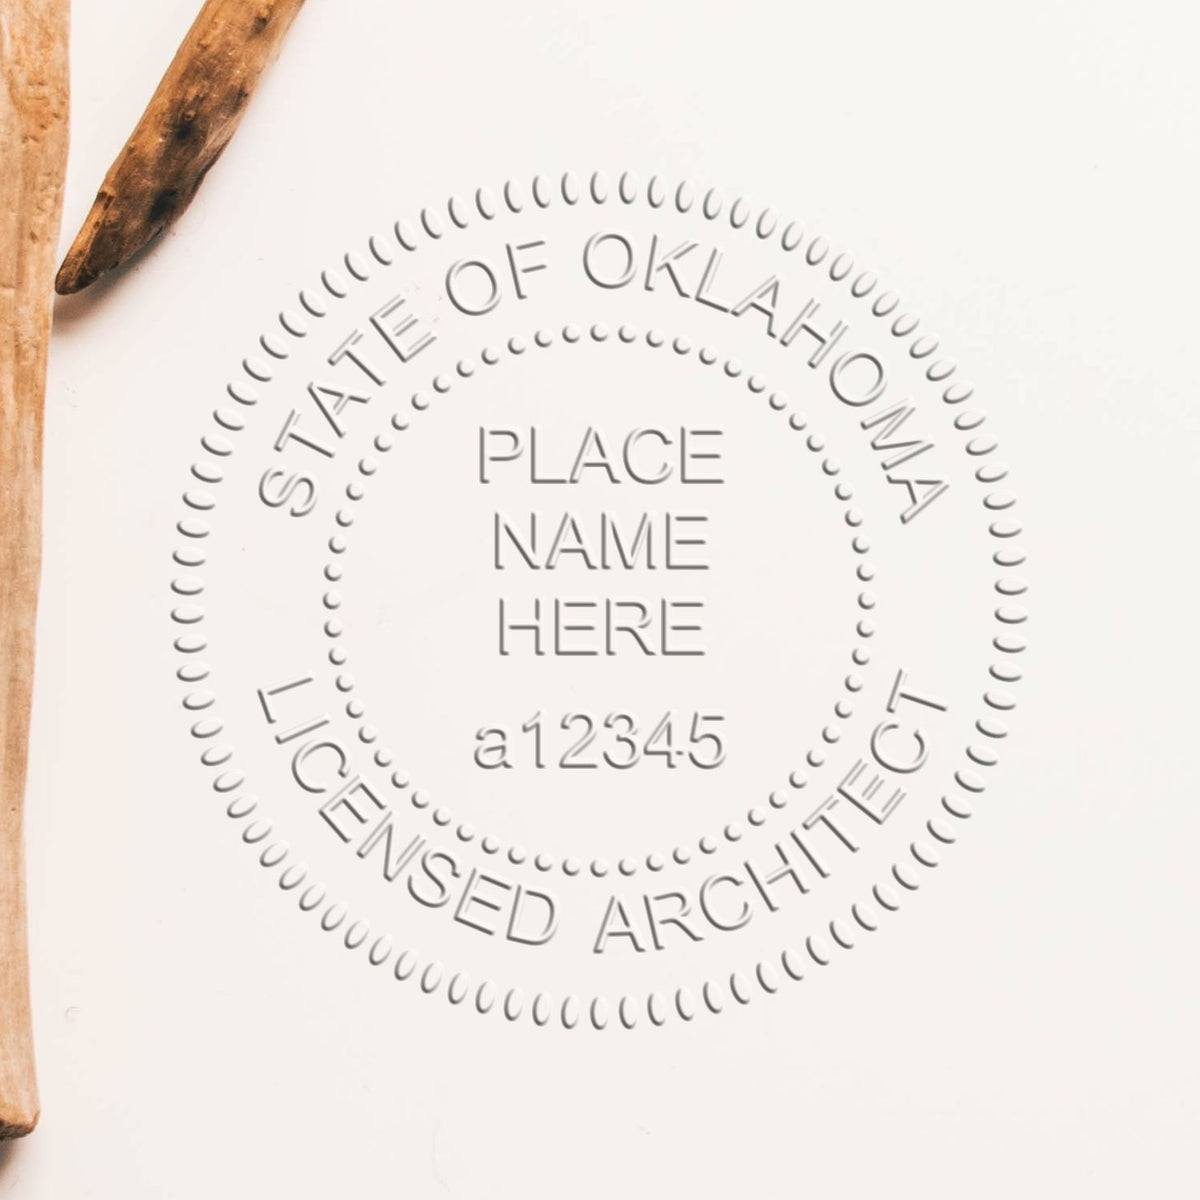 A stamped impression of the Heavy Duty Cast Iron Oklahoma Architect Embosser in this stylish lifestyle photo, setting the tone for a unique and personalized product.